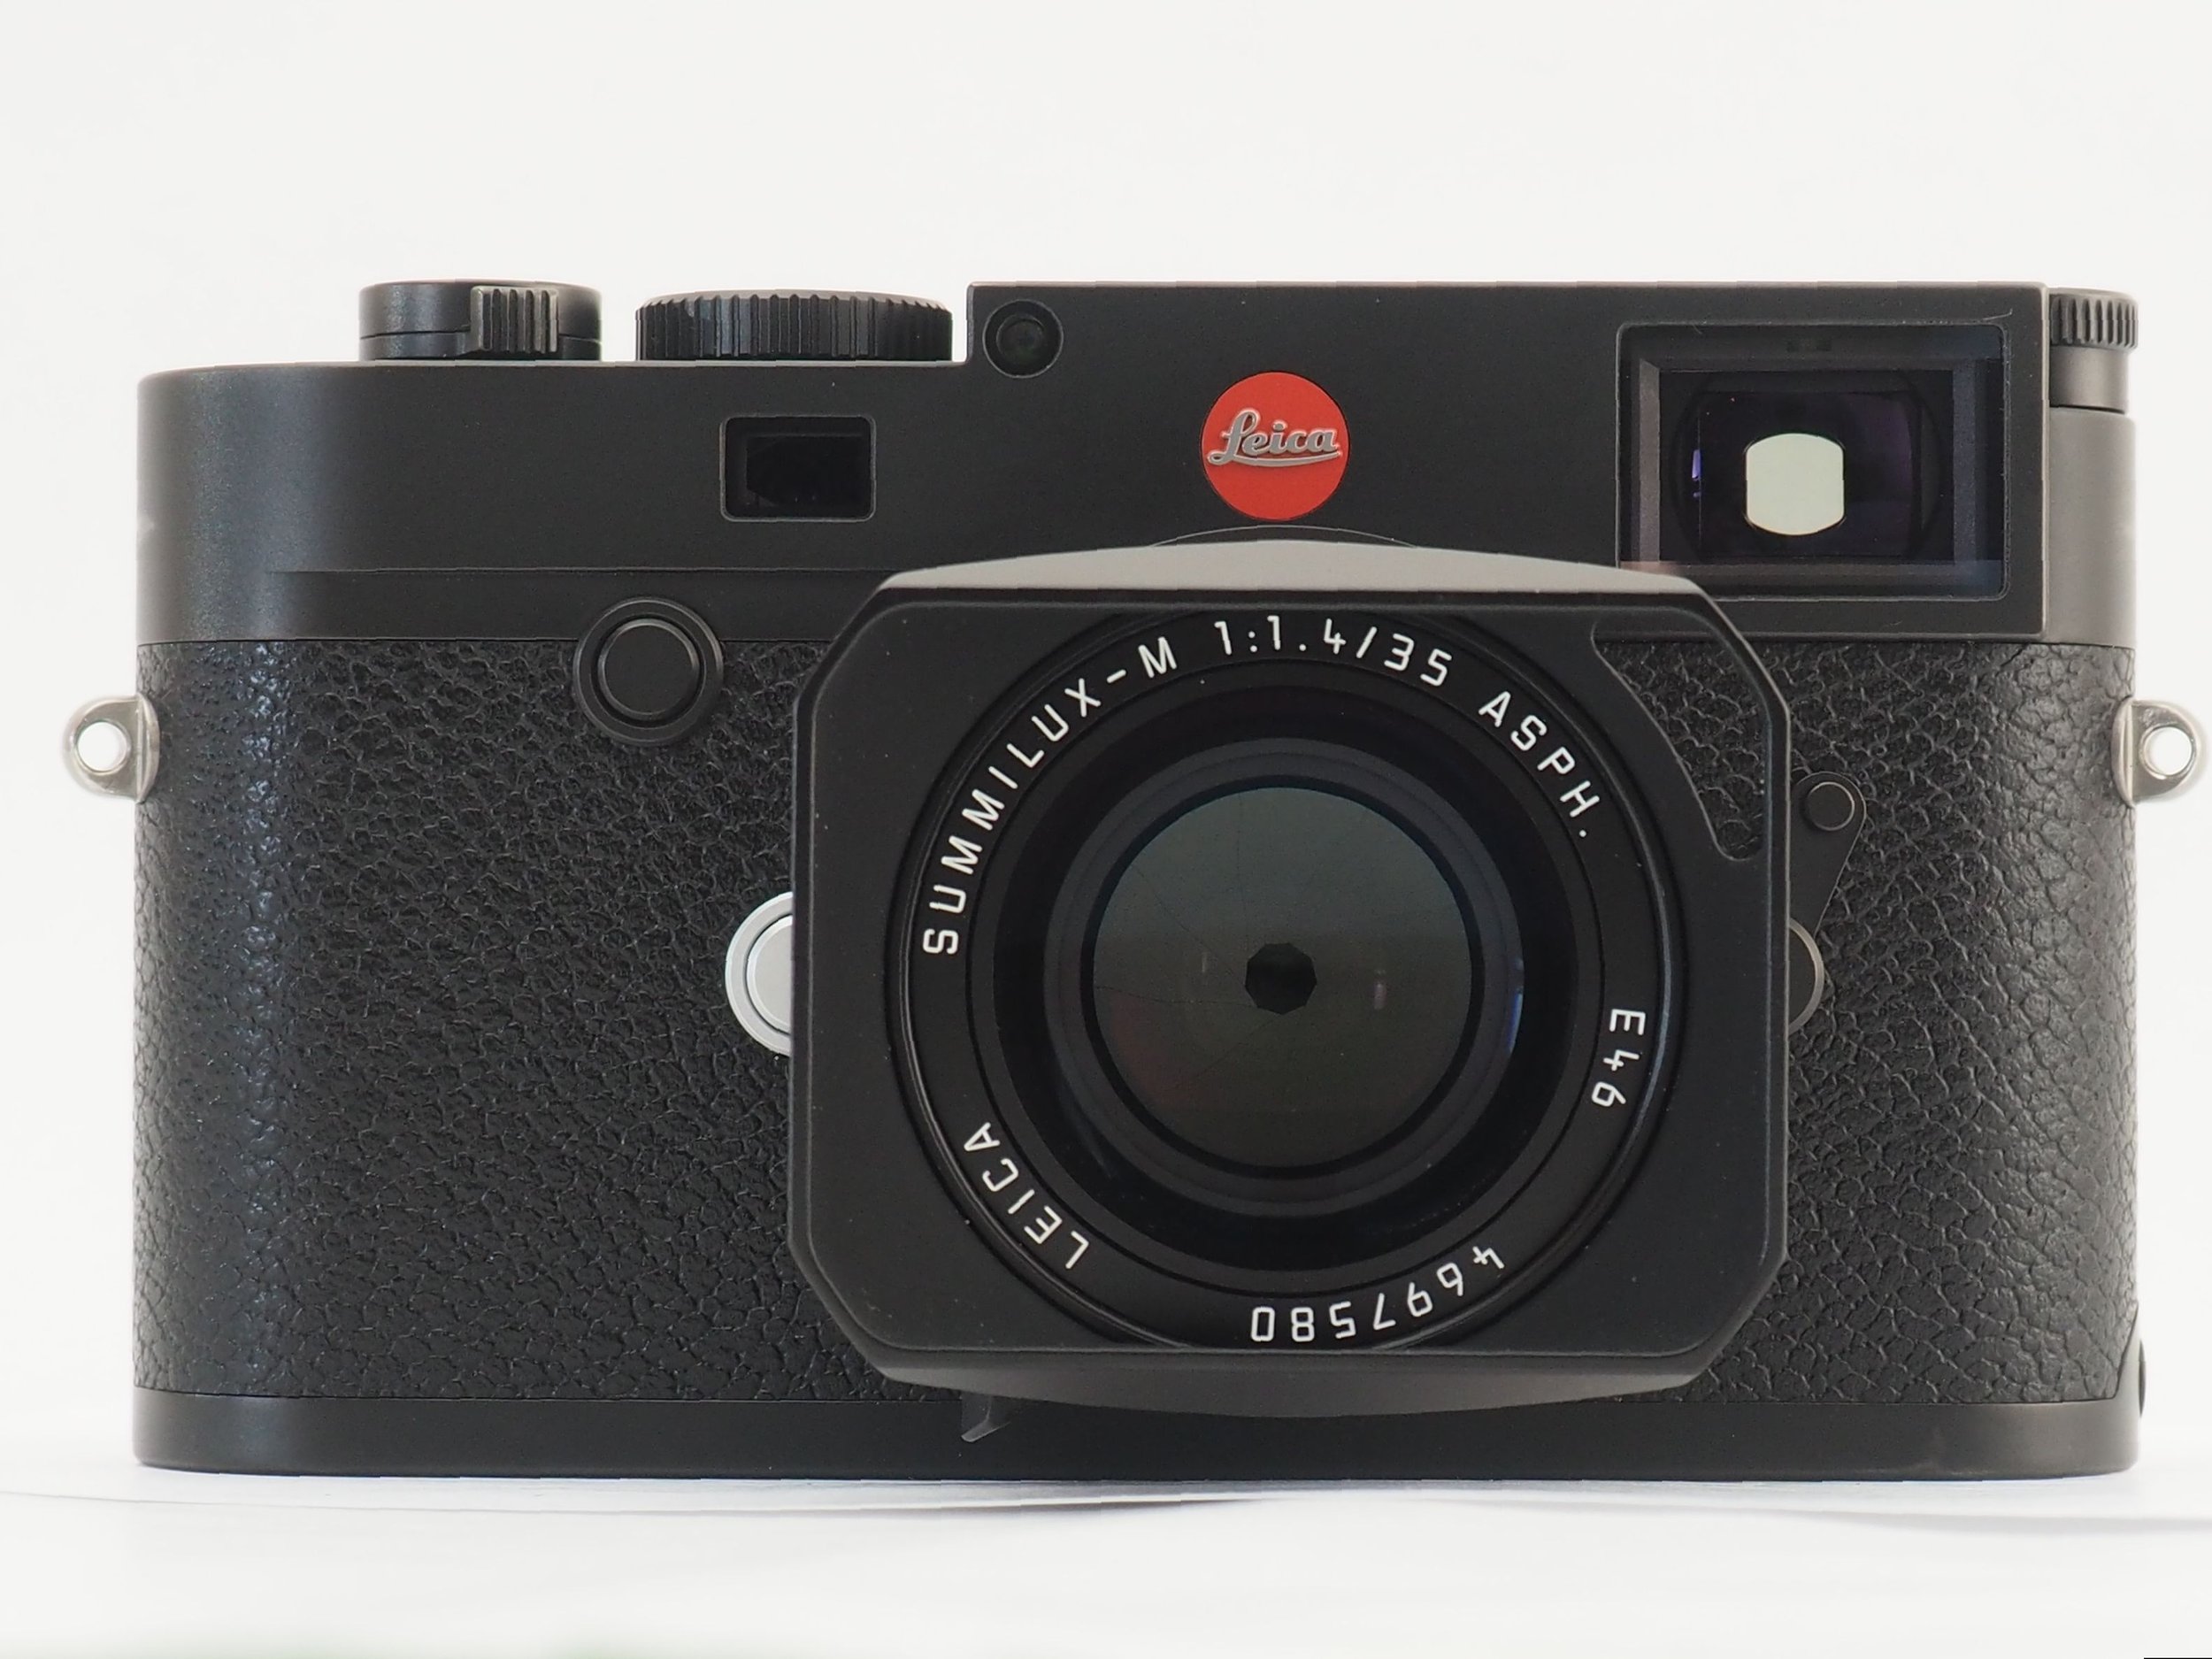 The Leica M10 Haptic (Fondler's) Review: Does it Feel Like a Real